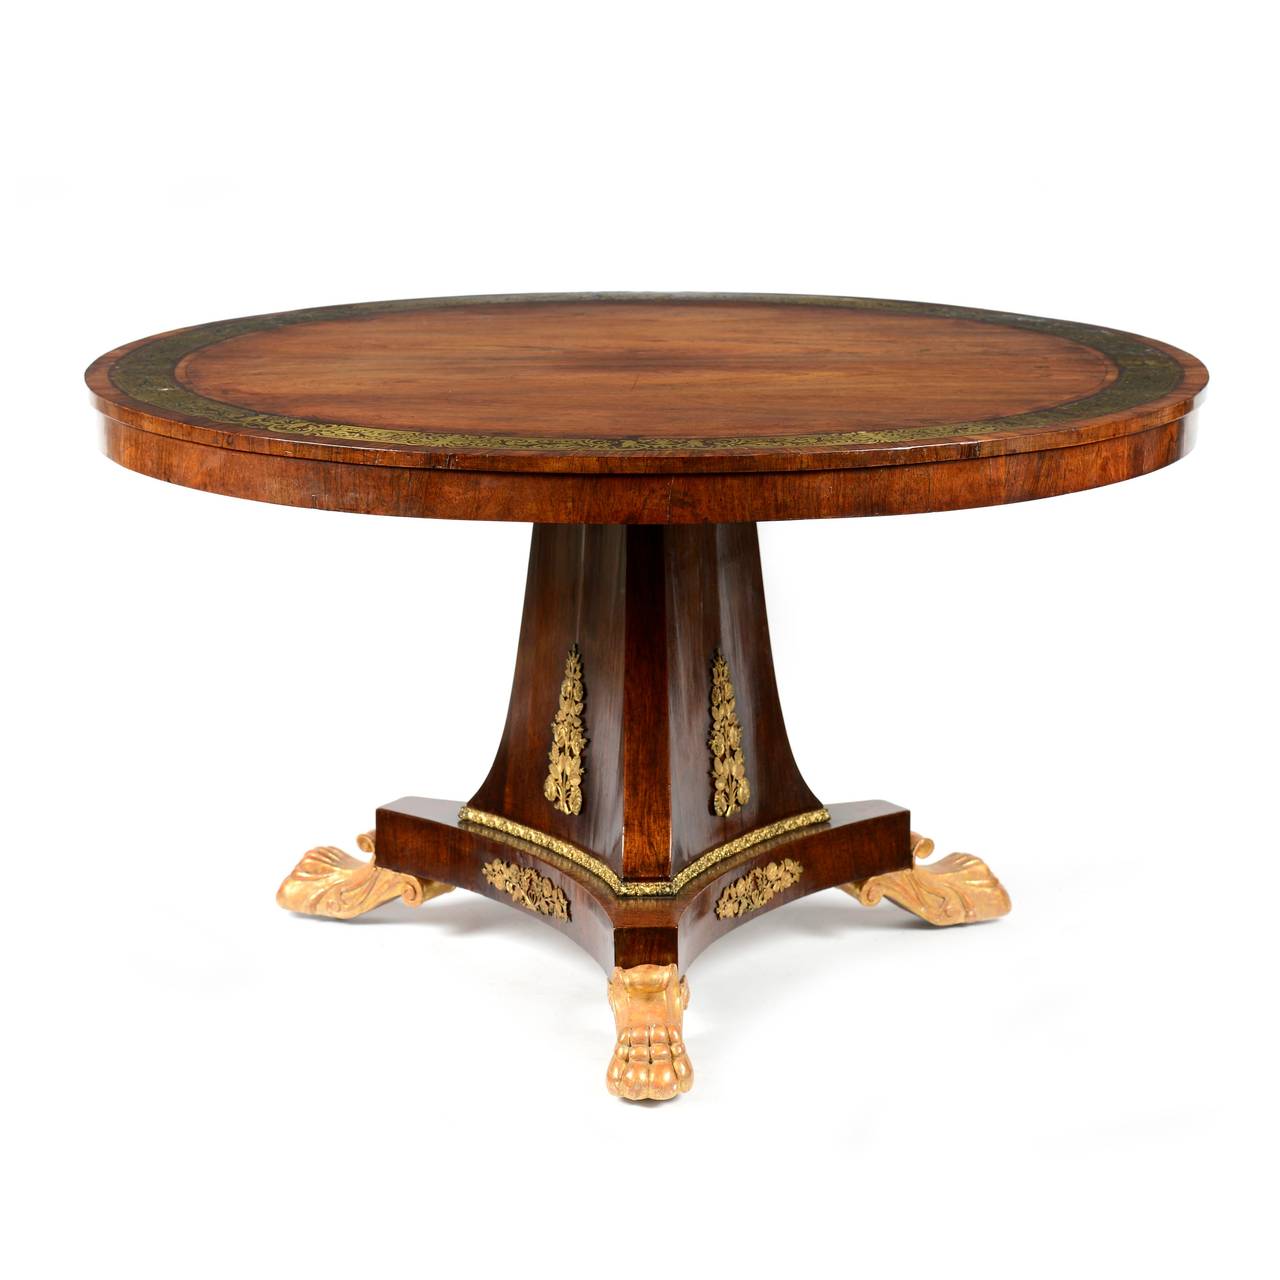 A superb Regency rosewood and brass inlaid centre table by S. Jamar, London. The circular top of well figured rosewood veneer, cross- banded to the outer circumference, this cross-banding further inlaid with a band of kingwood with a foliate cut